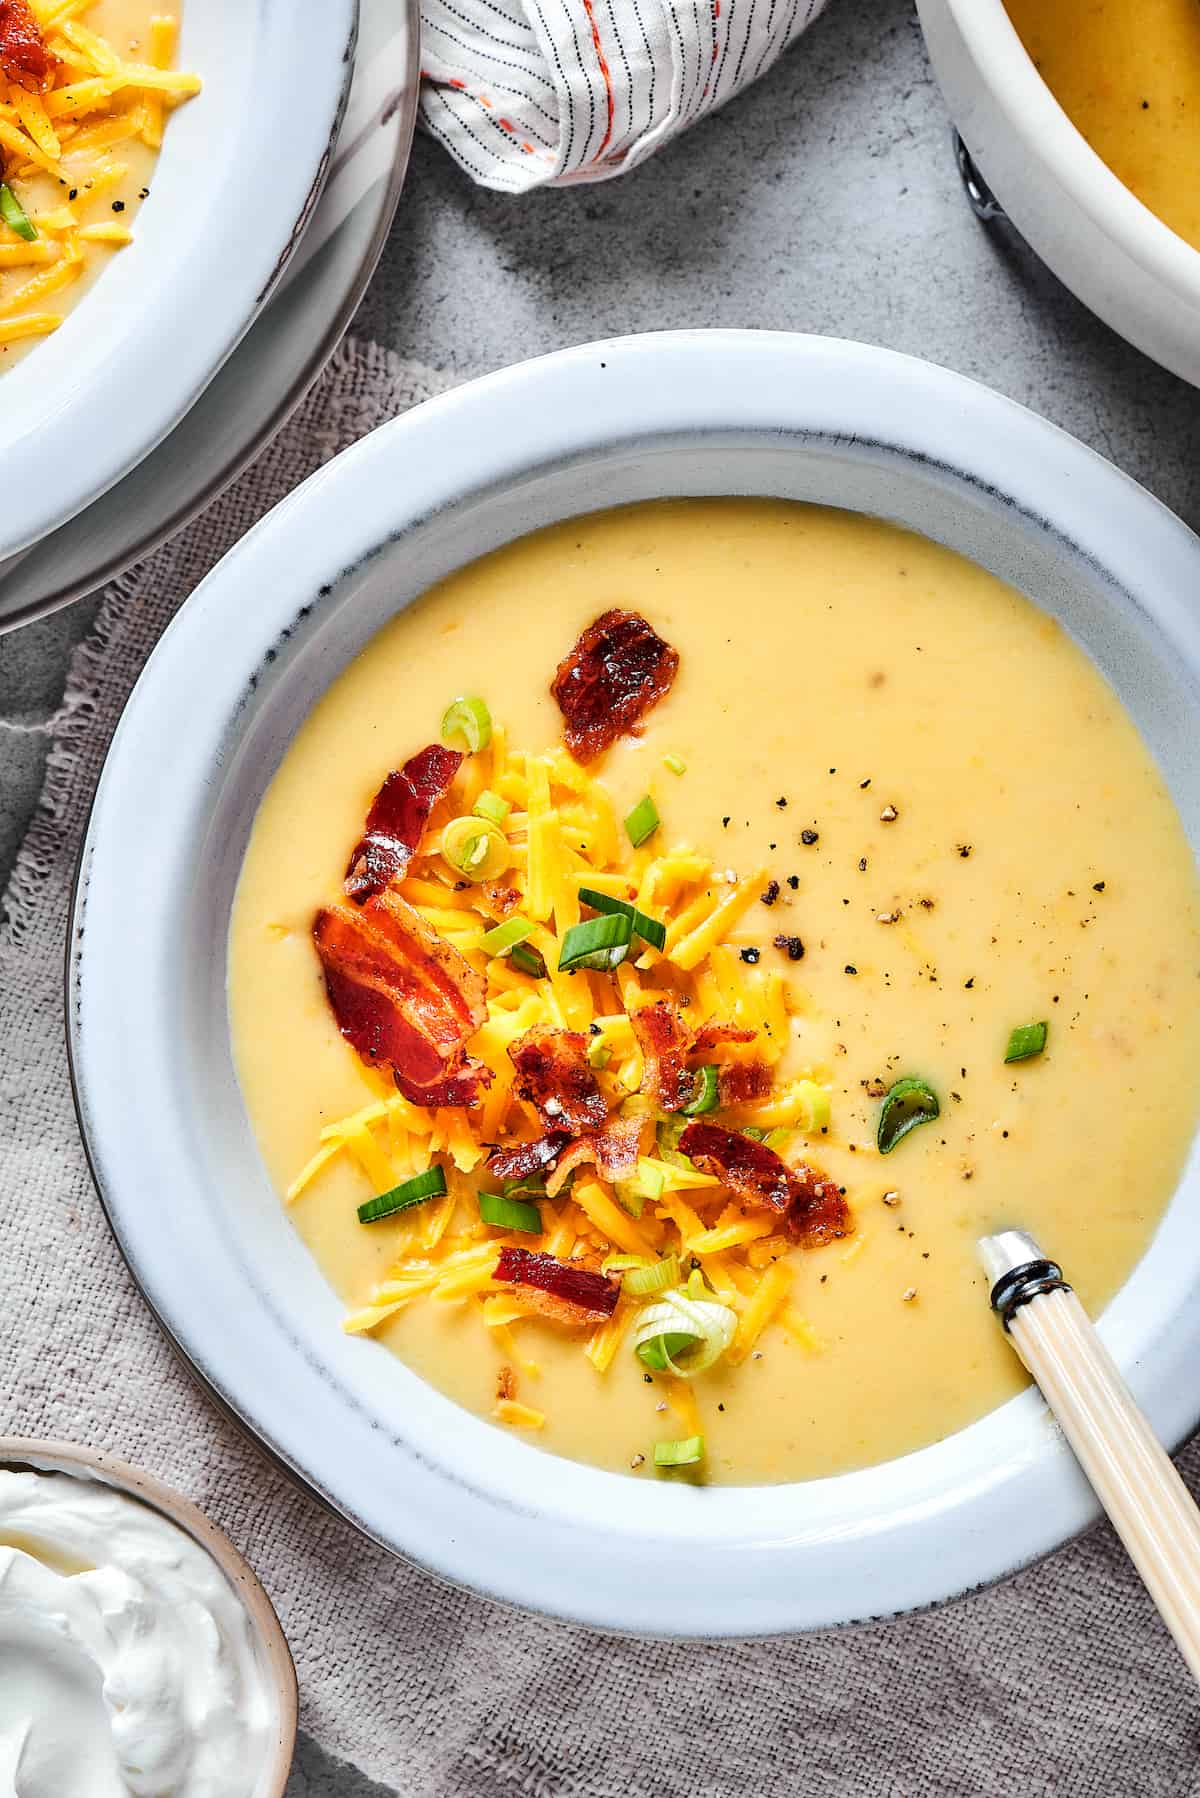 Baked potato soup served in a bowl.